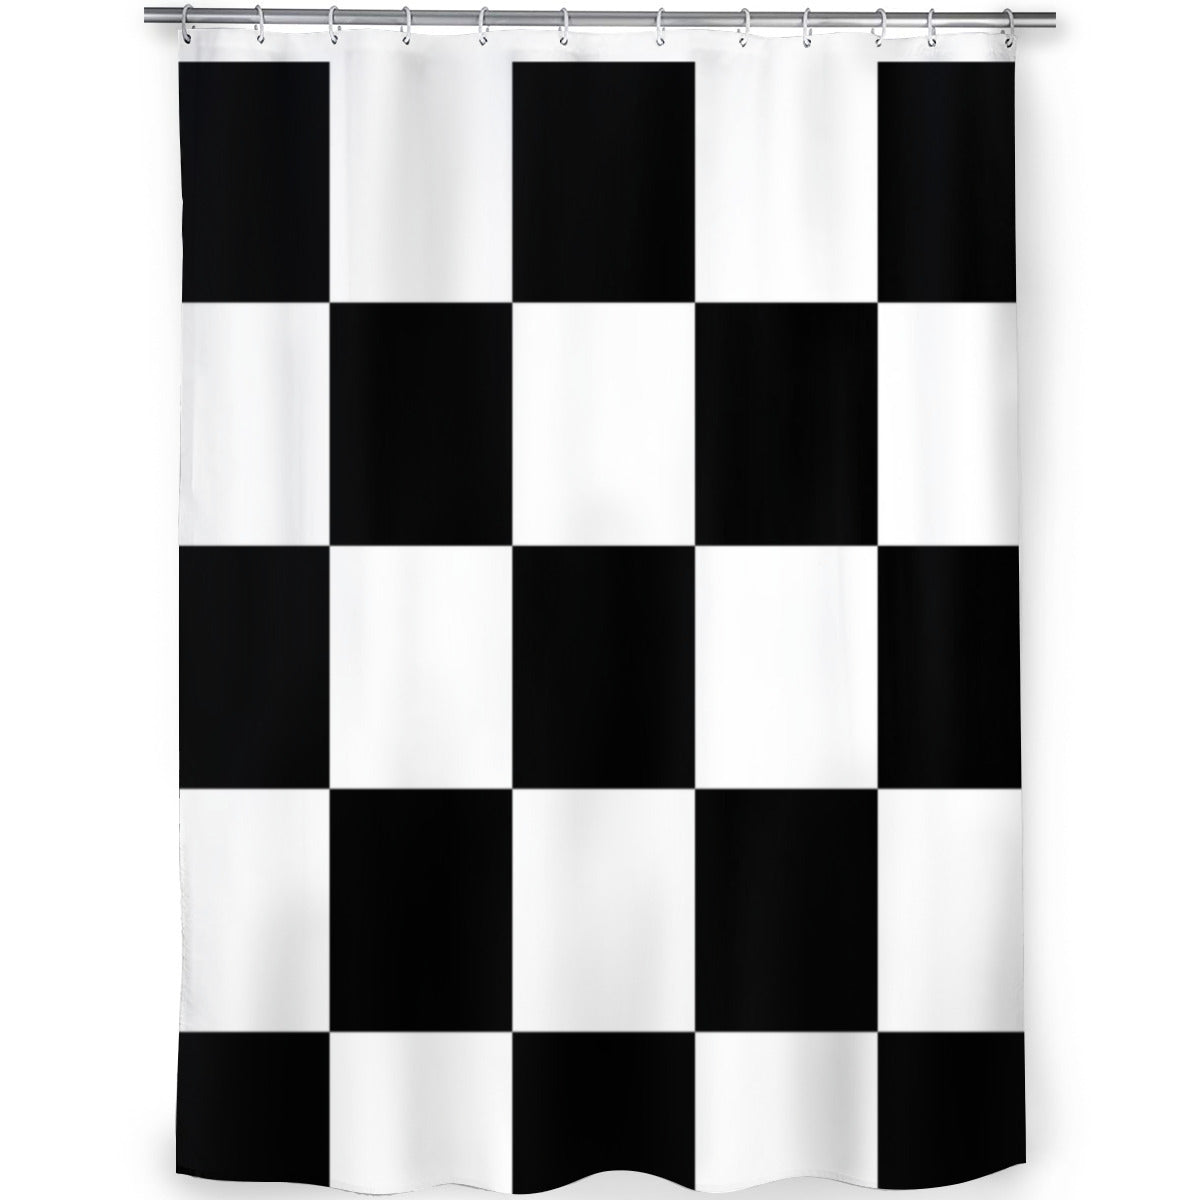 Shower Curtain black and white Home-clothes-jewelry